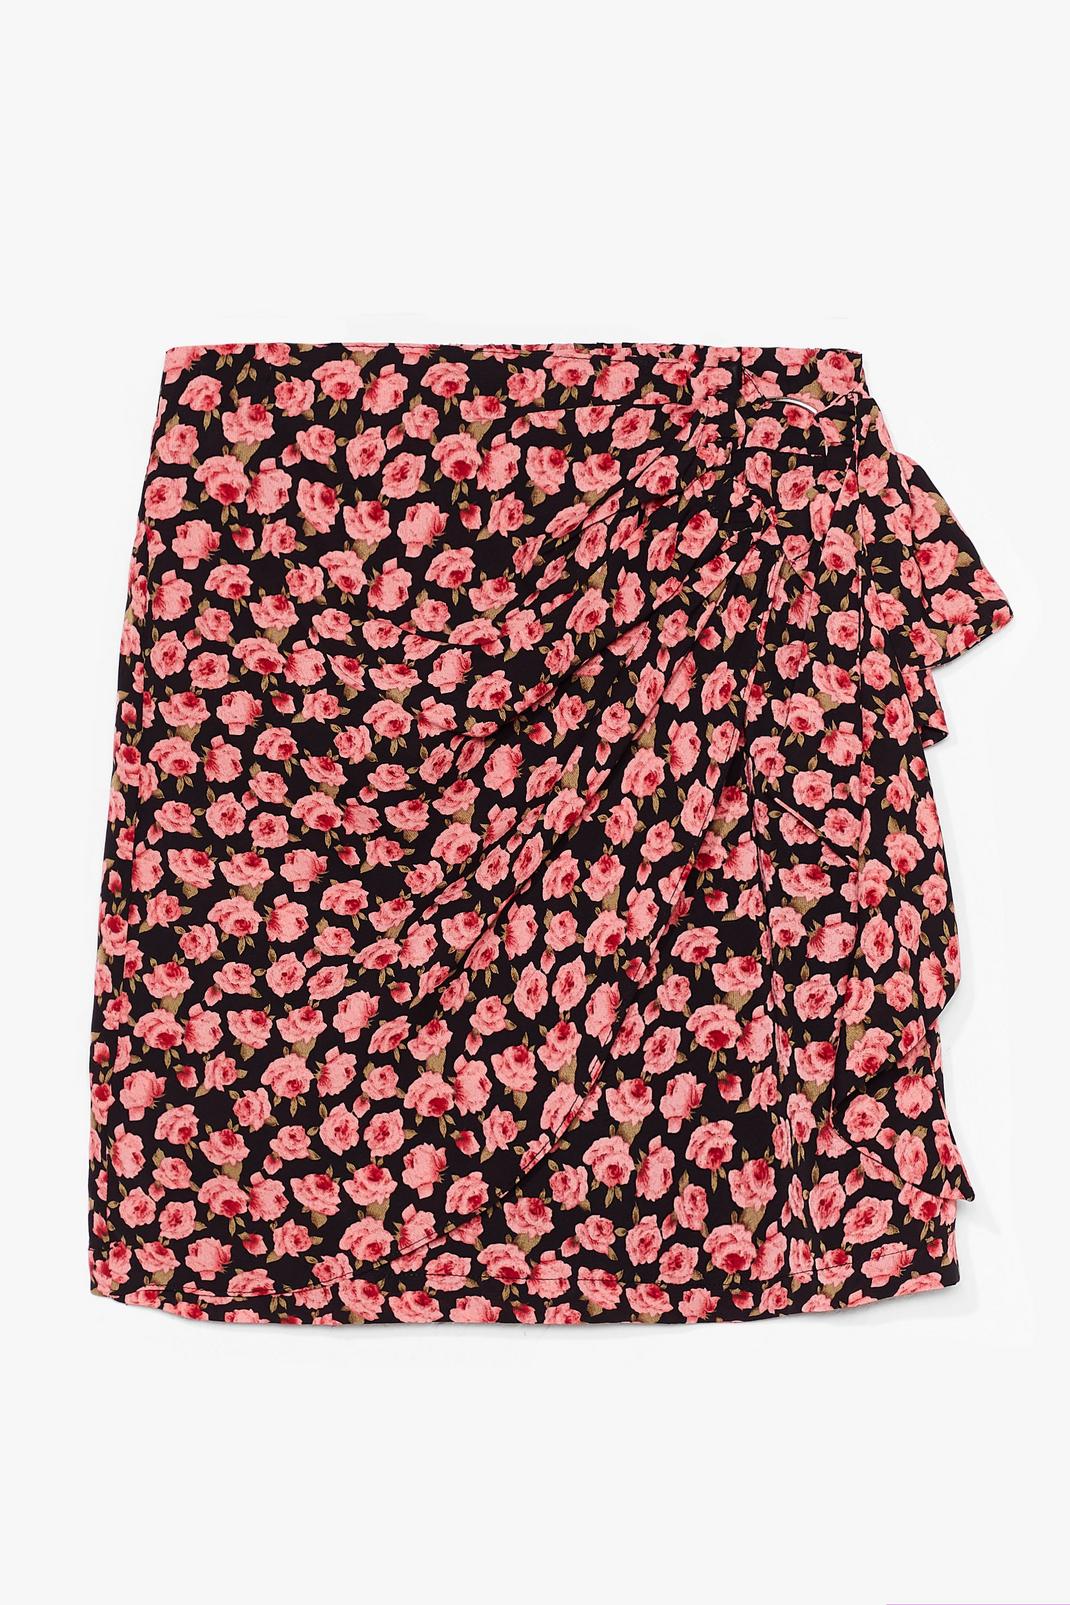 The Floral the Merrier Tie Mini Skirt image number 1